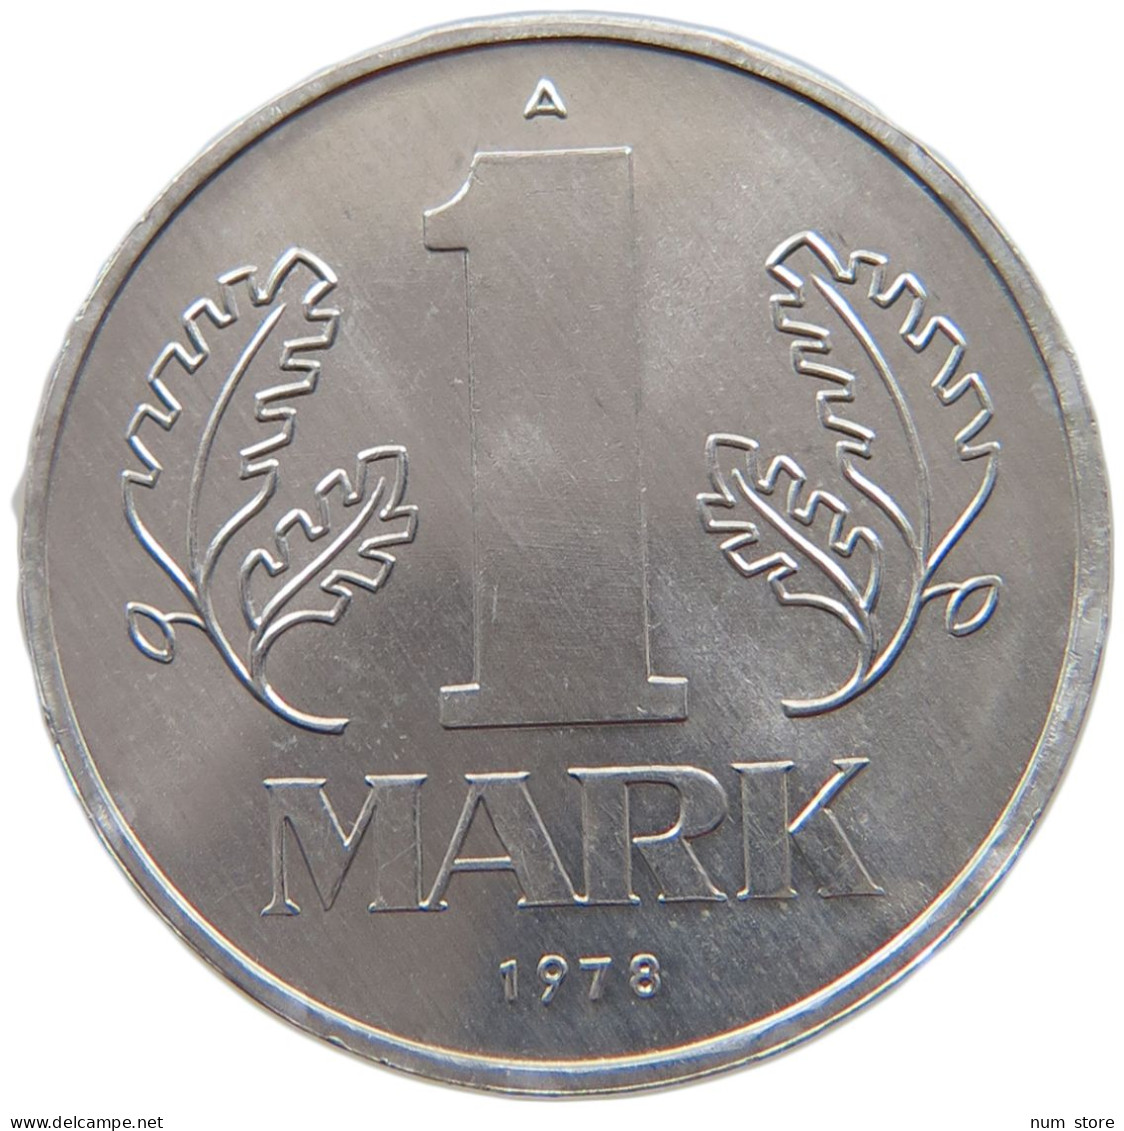 GERMANY DDR 1 MARK 1978 TOP #a076 0267 - 1 Mark